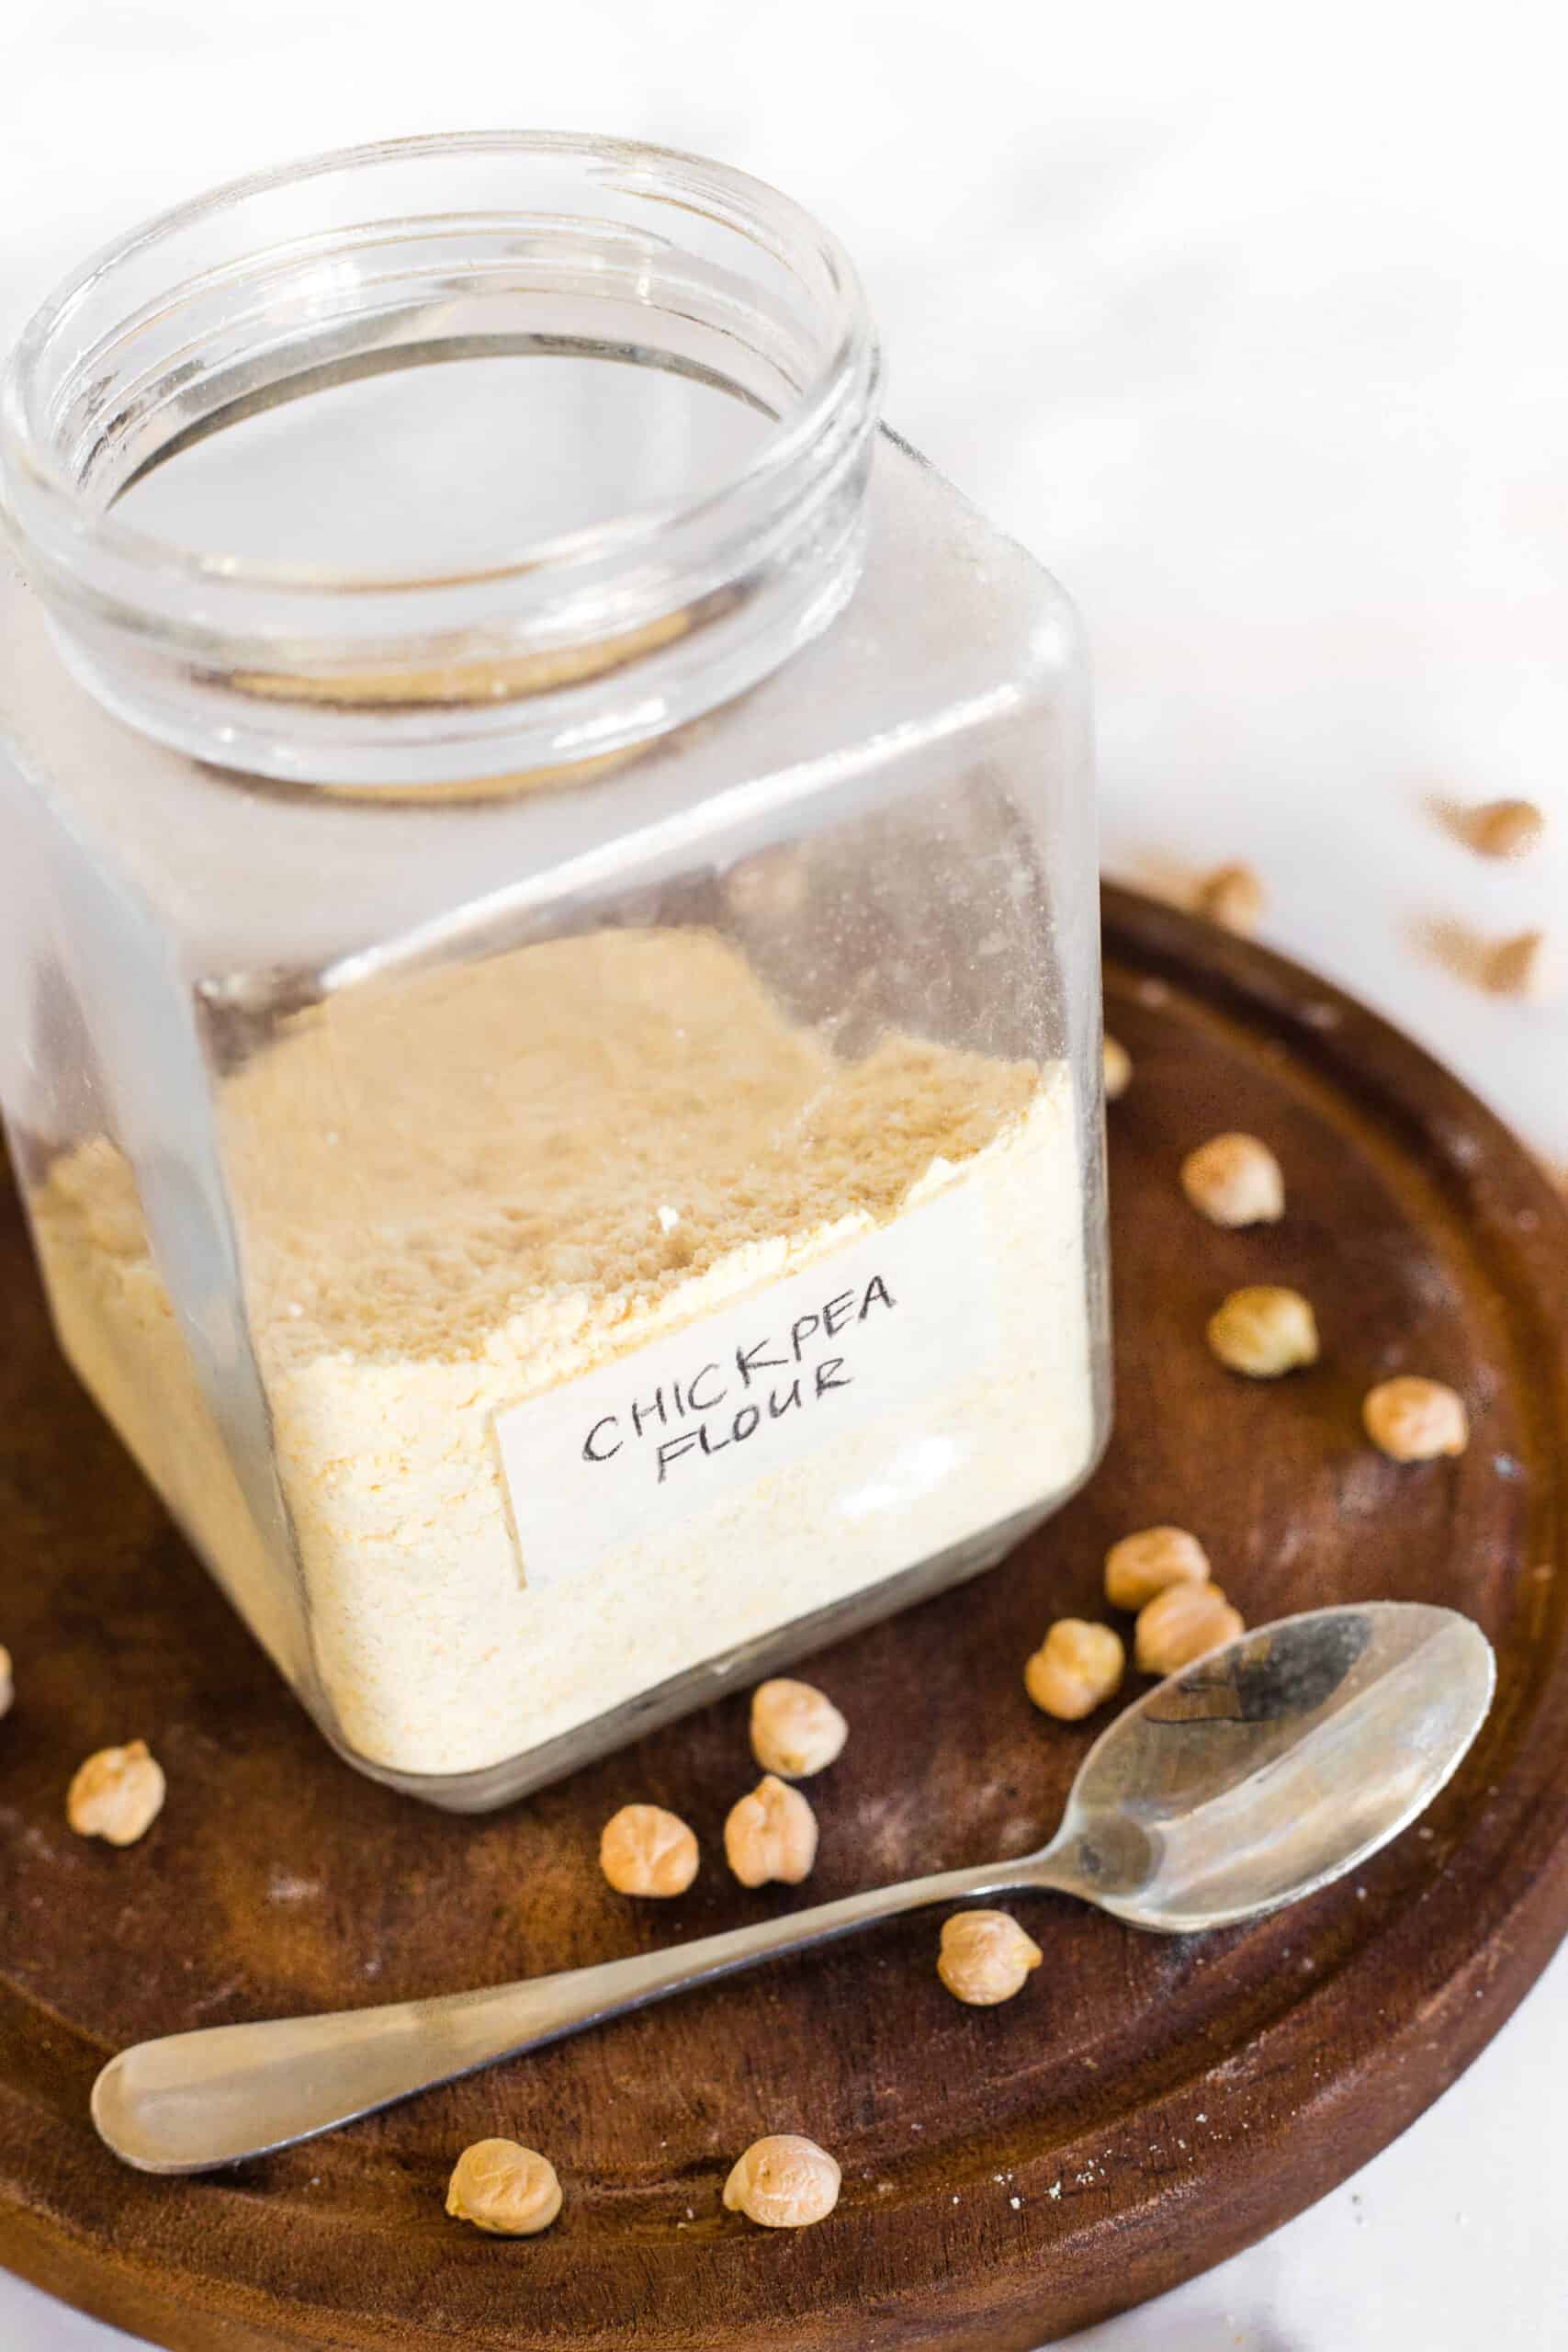 A half-filled glass jar with chickpea flour.